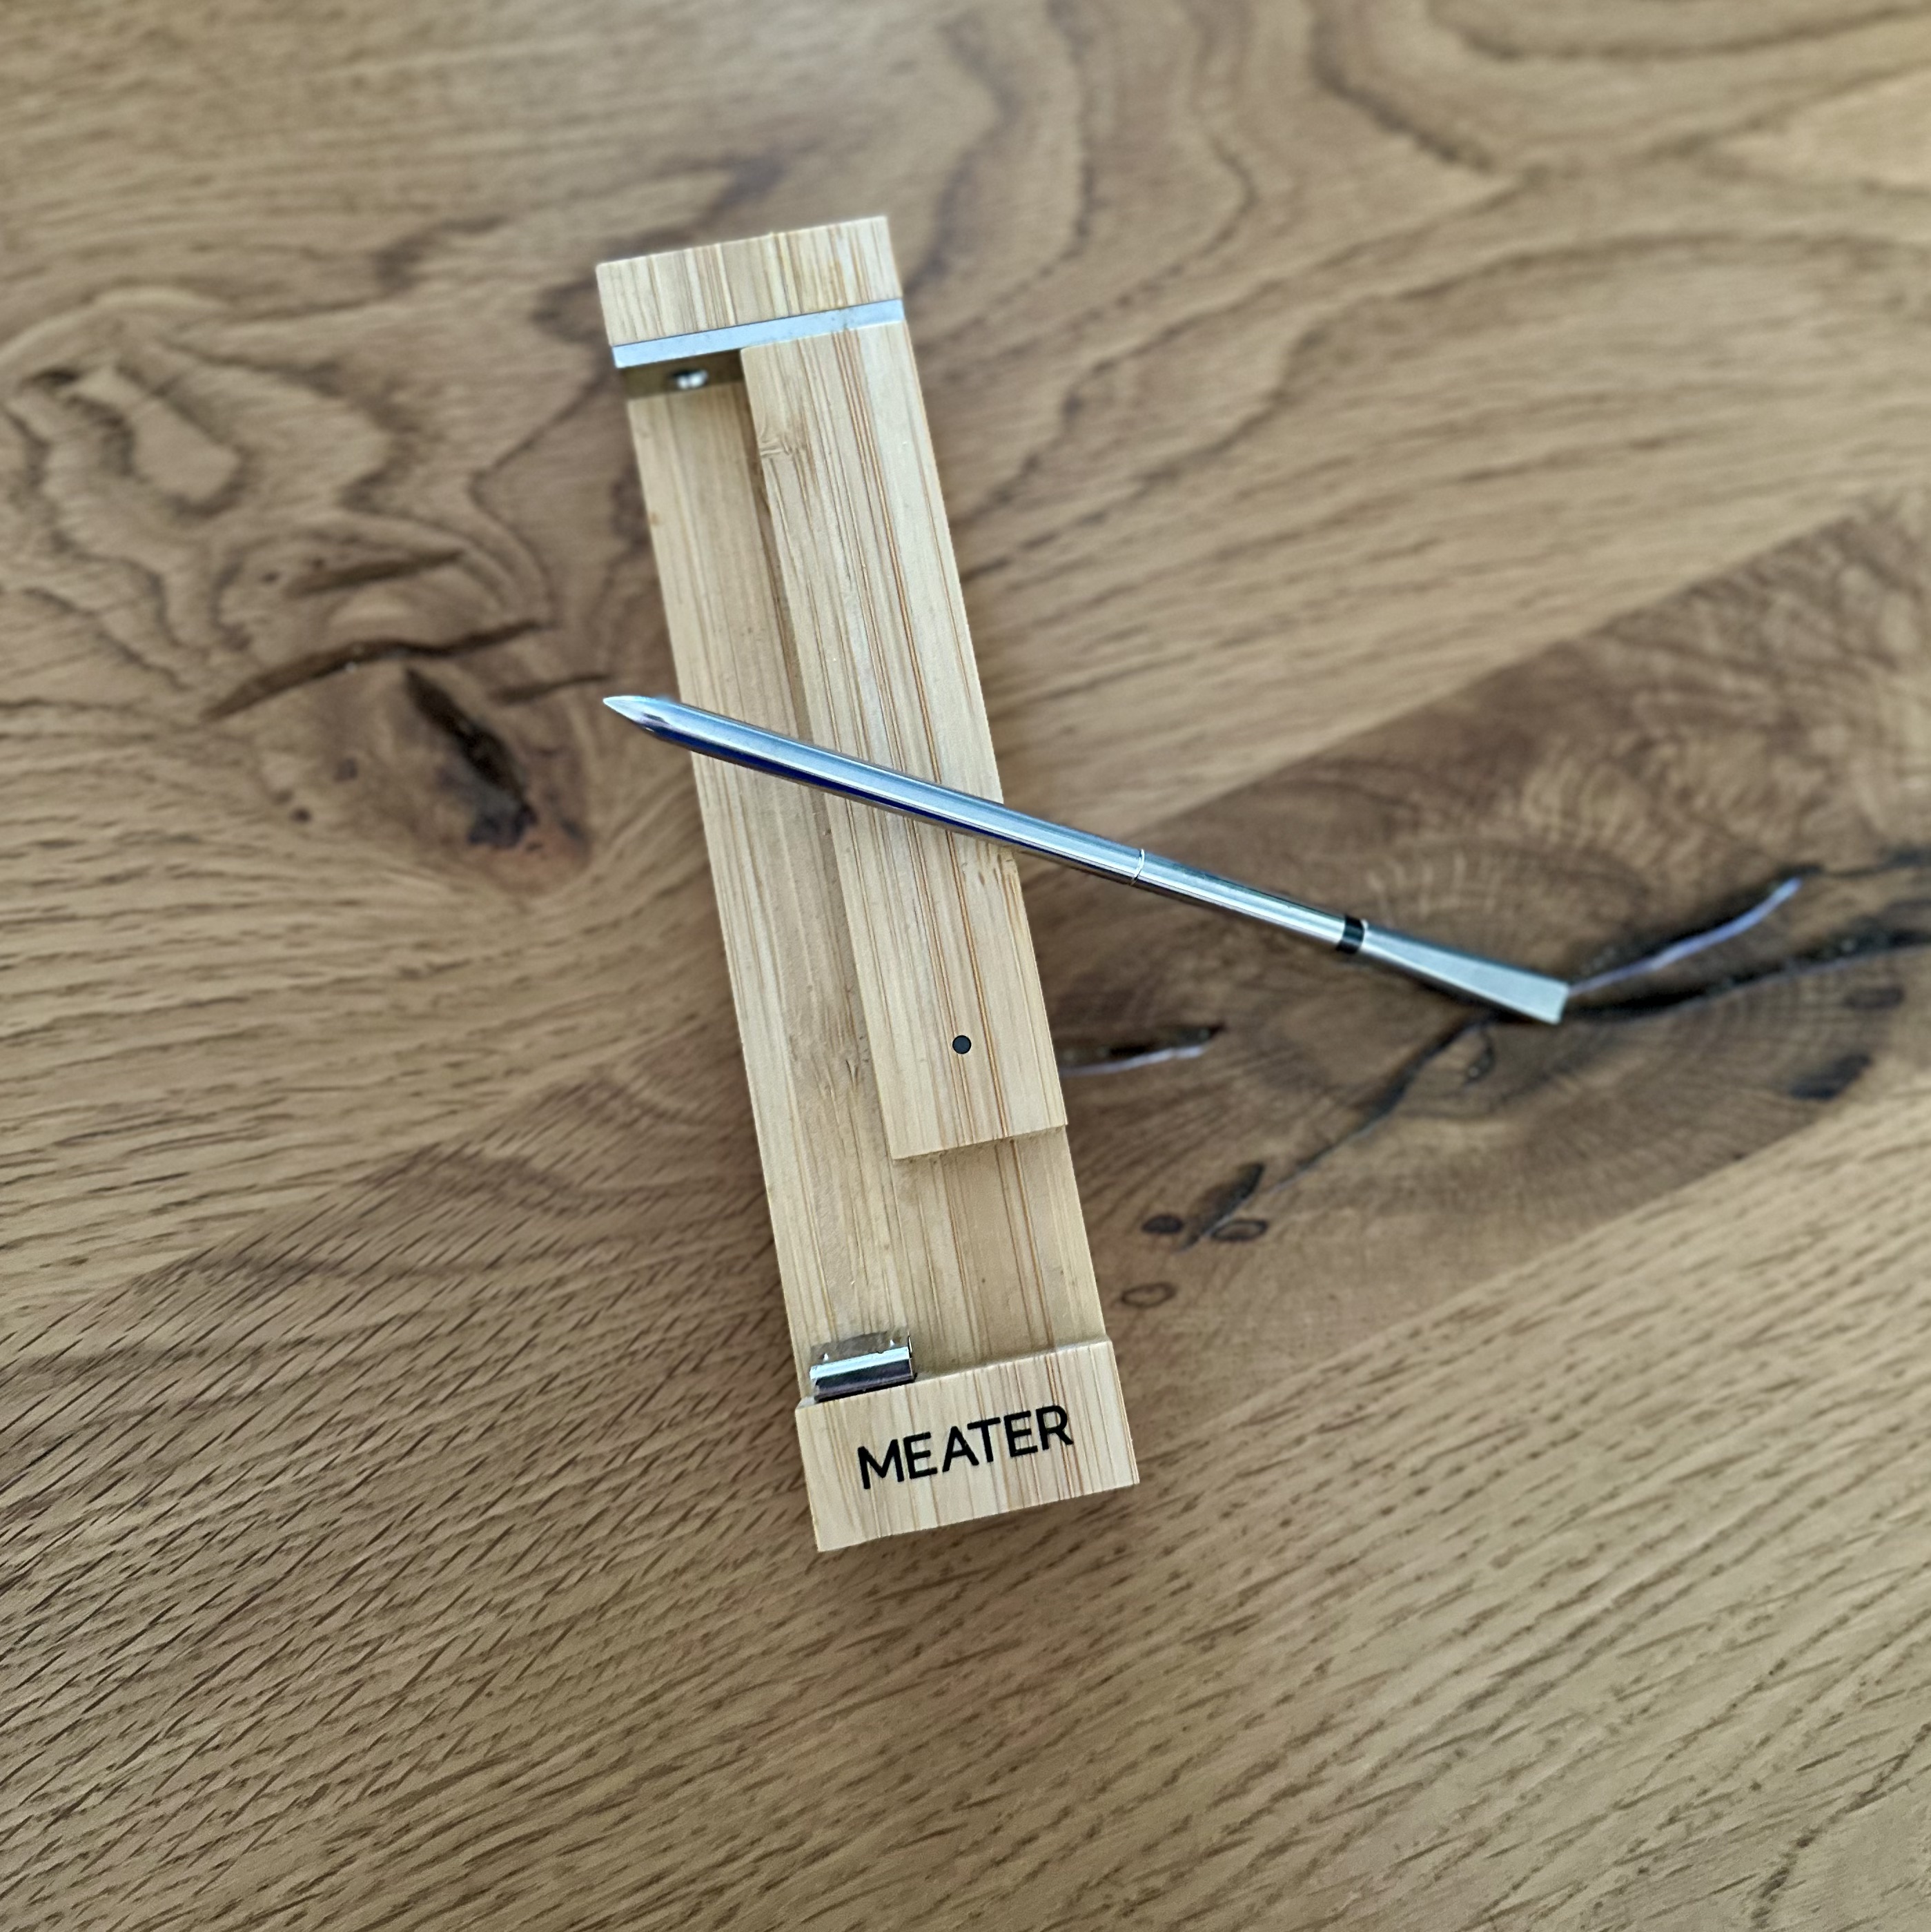 Meater 2 Plus review: dé BBQ vleesthermometer van dit moment